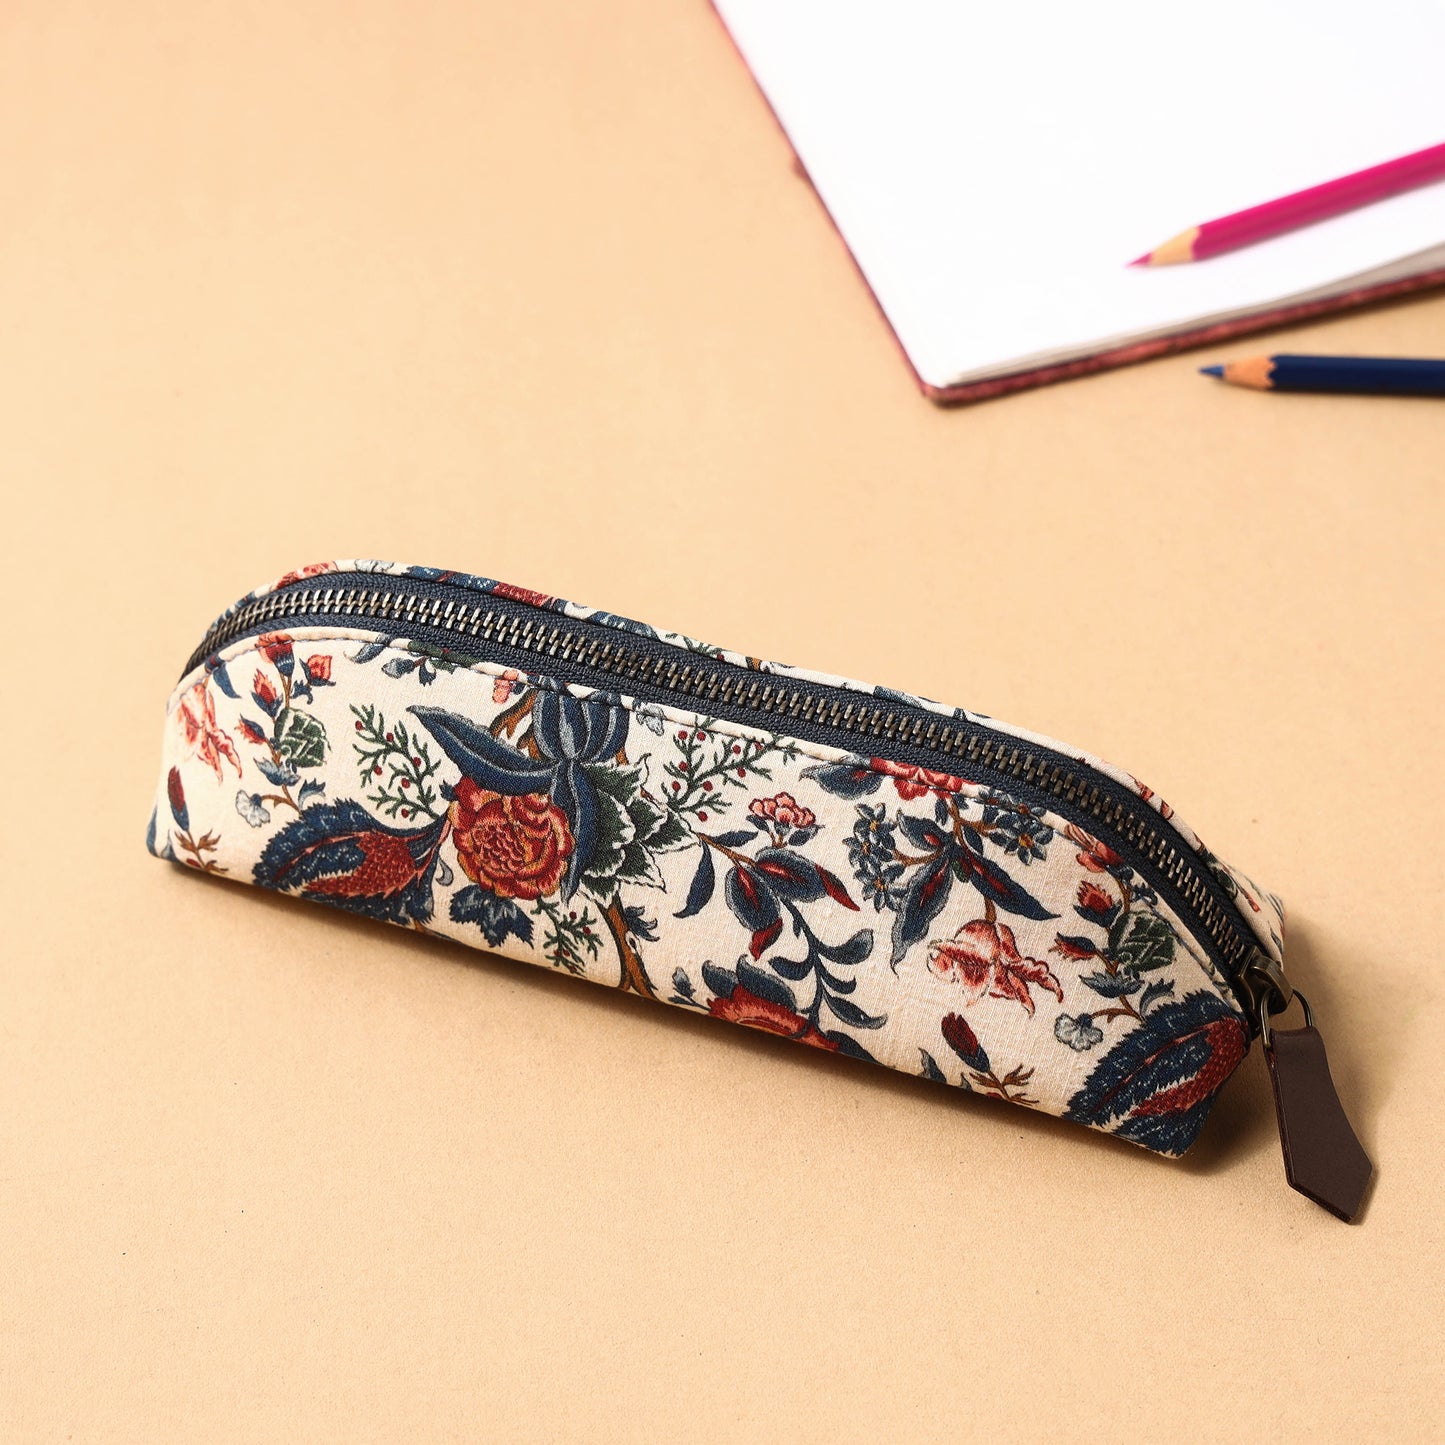 Printed Pencil Pouch
